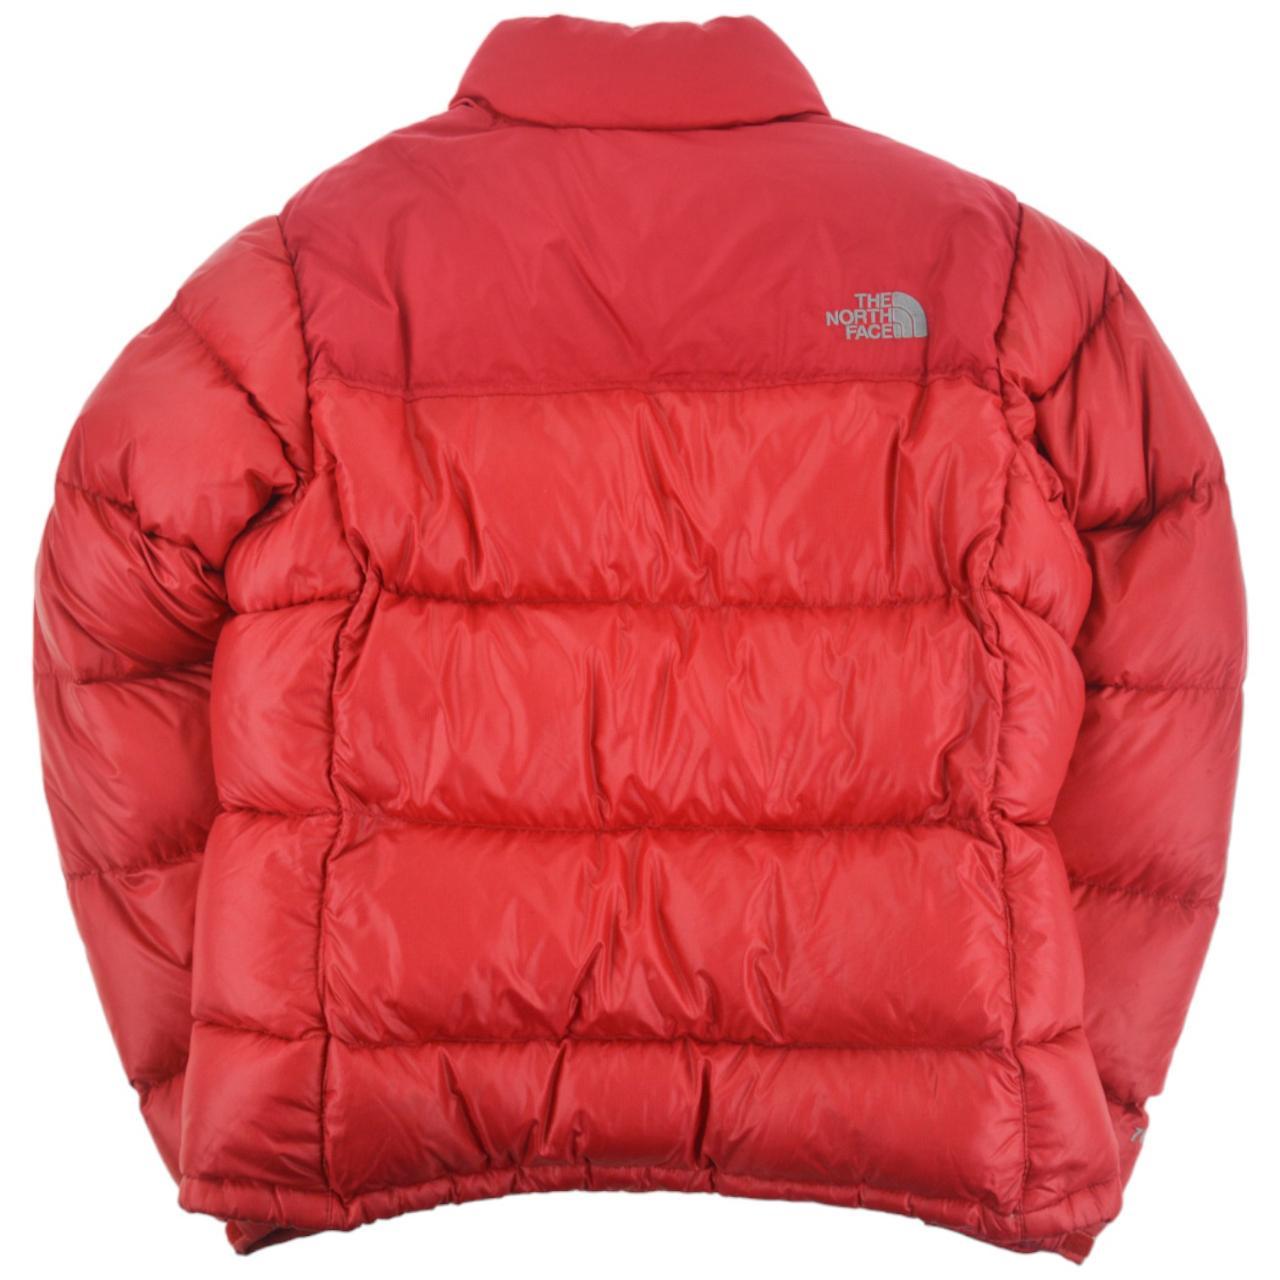 Vintage North Face Nuptse Puffer Jacket Woman’s Size M - second wave ...